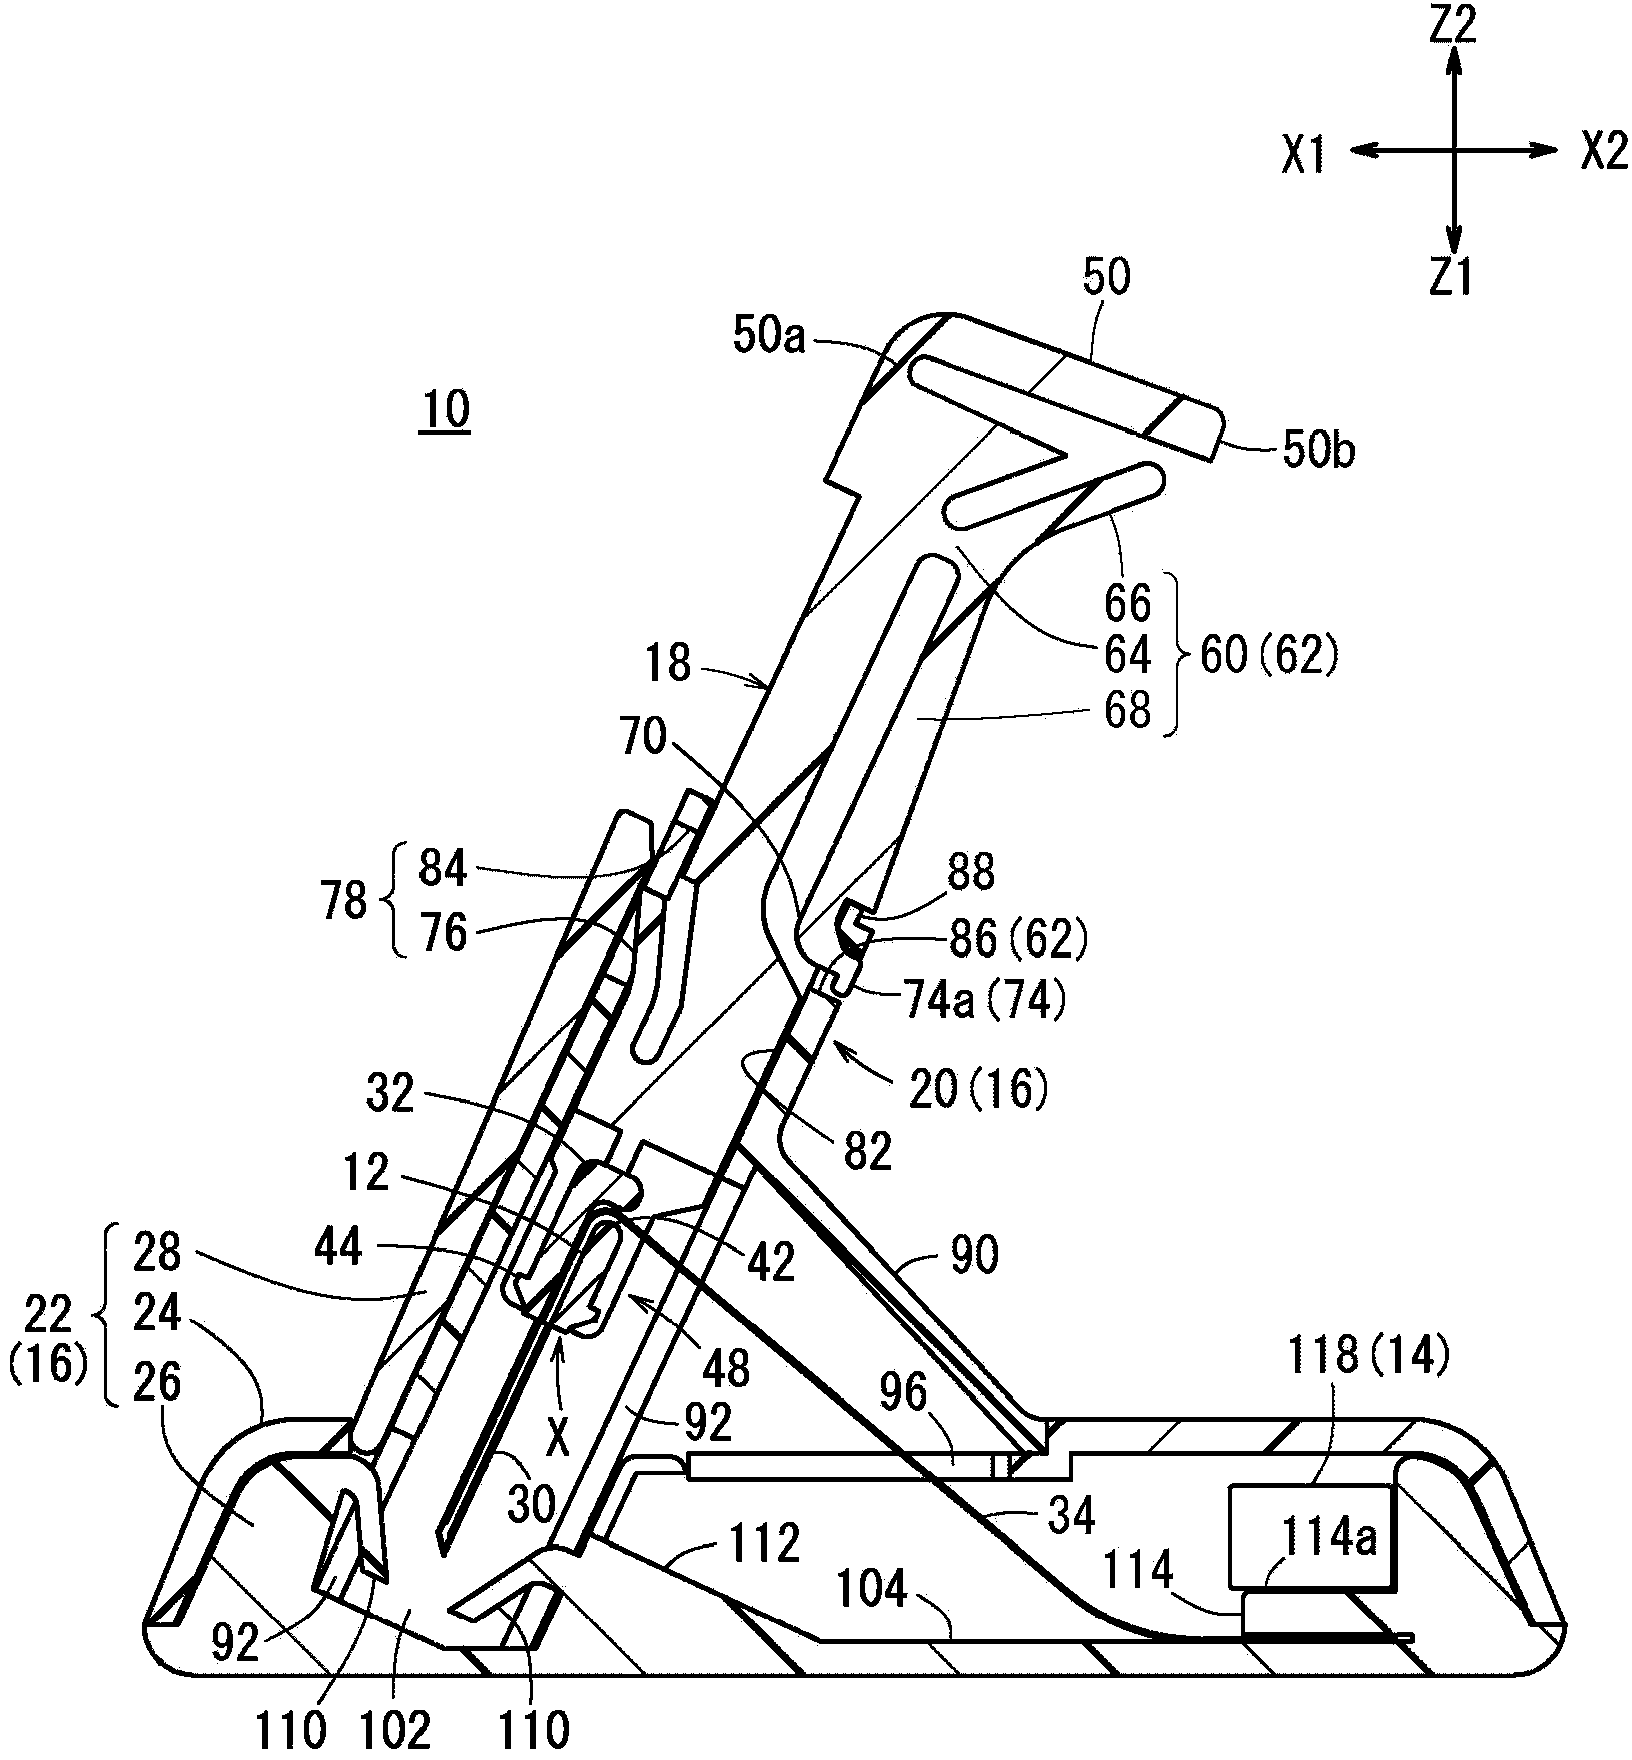 Sensor insertion device and method for operating said device